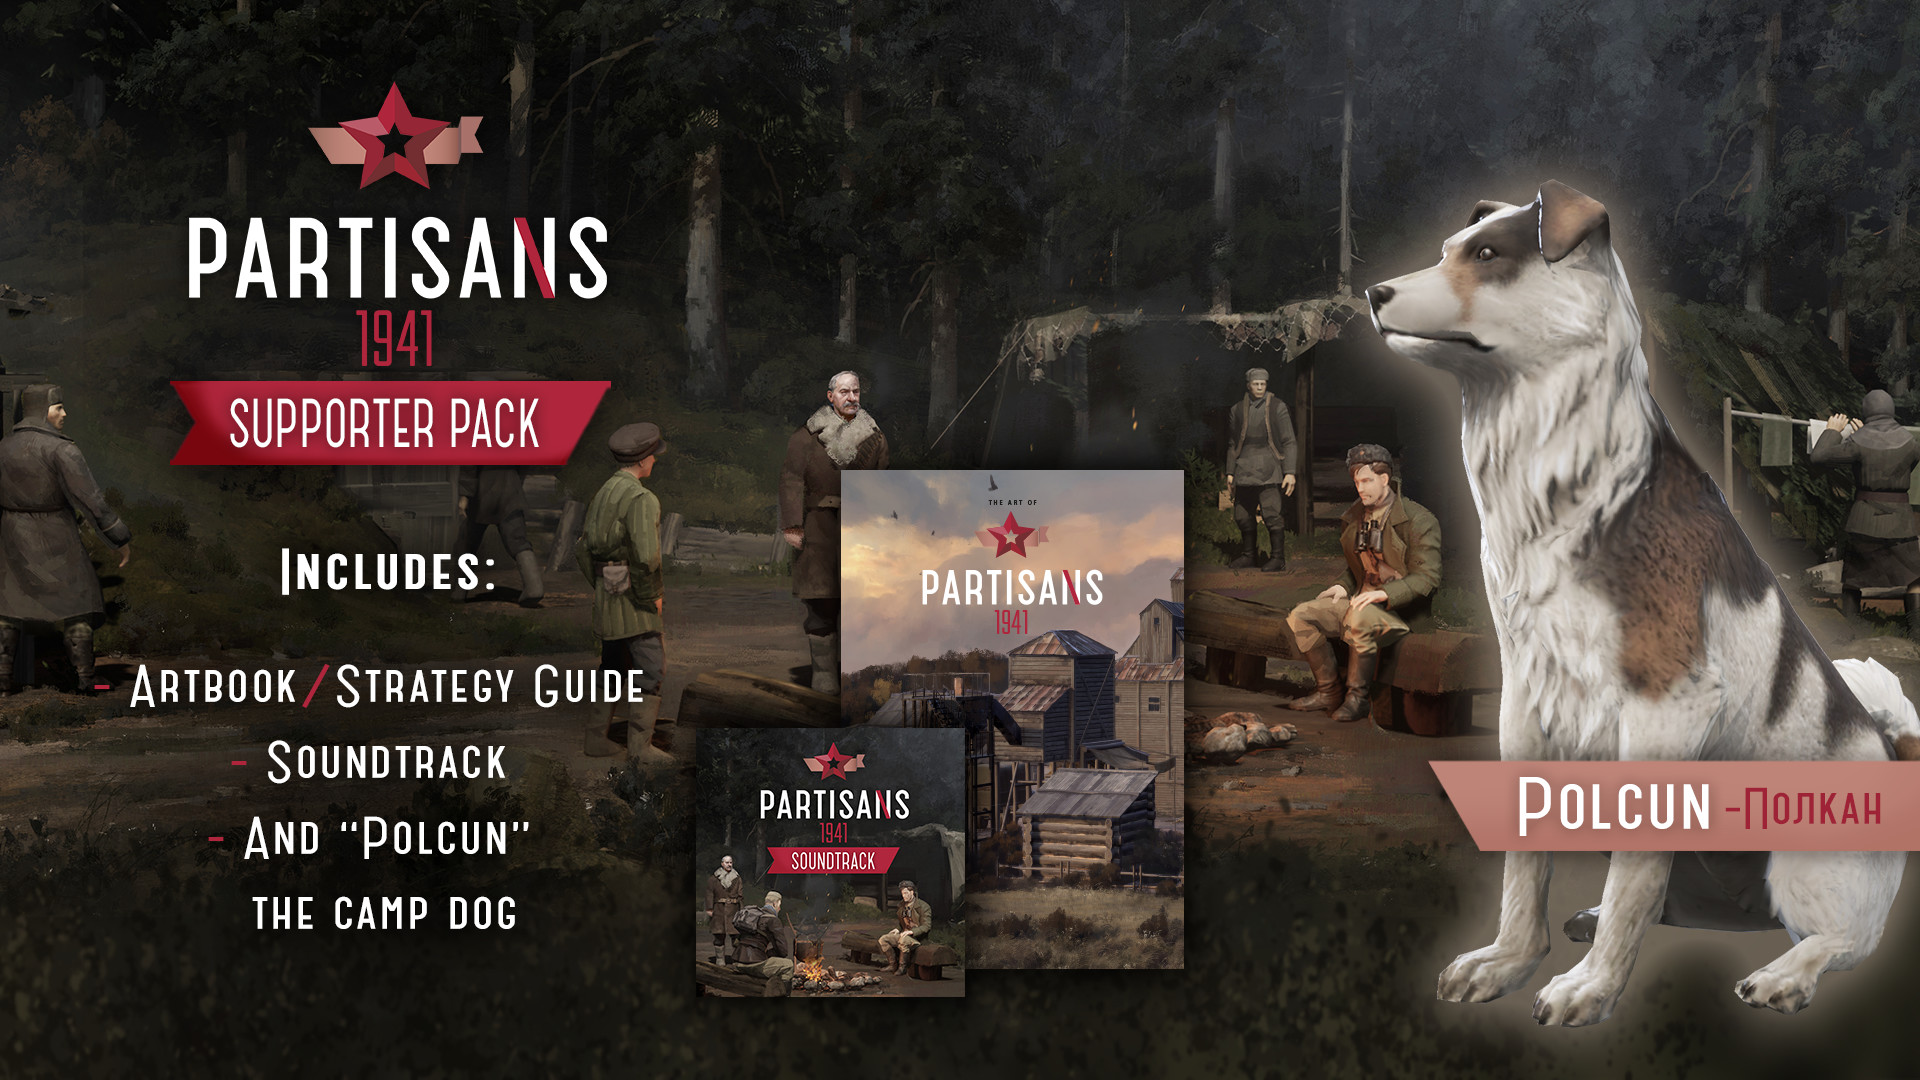 Partisans 1941 - Supporter Pack on Steam